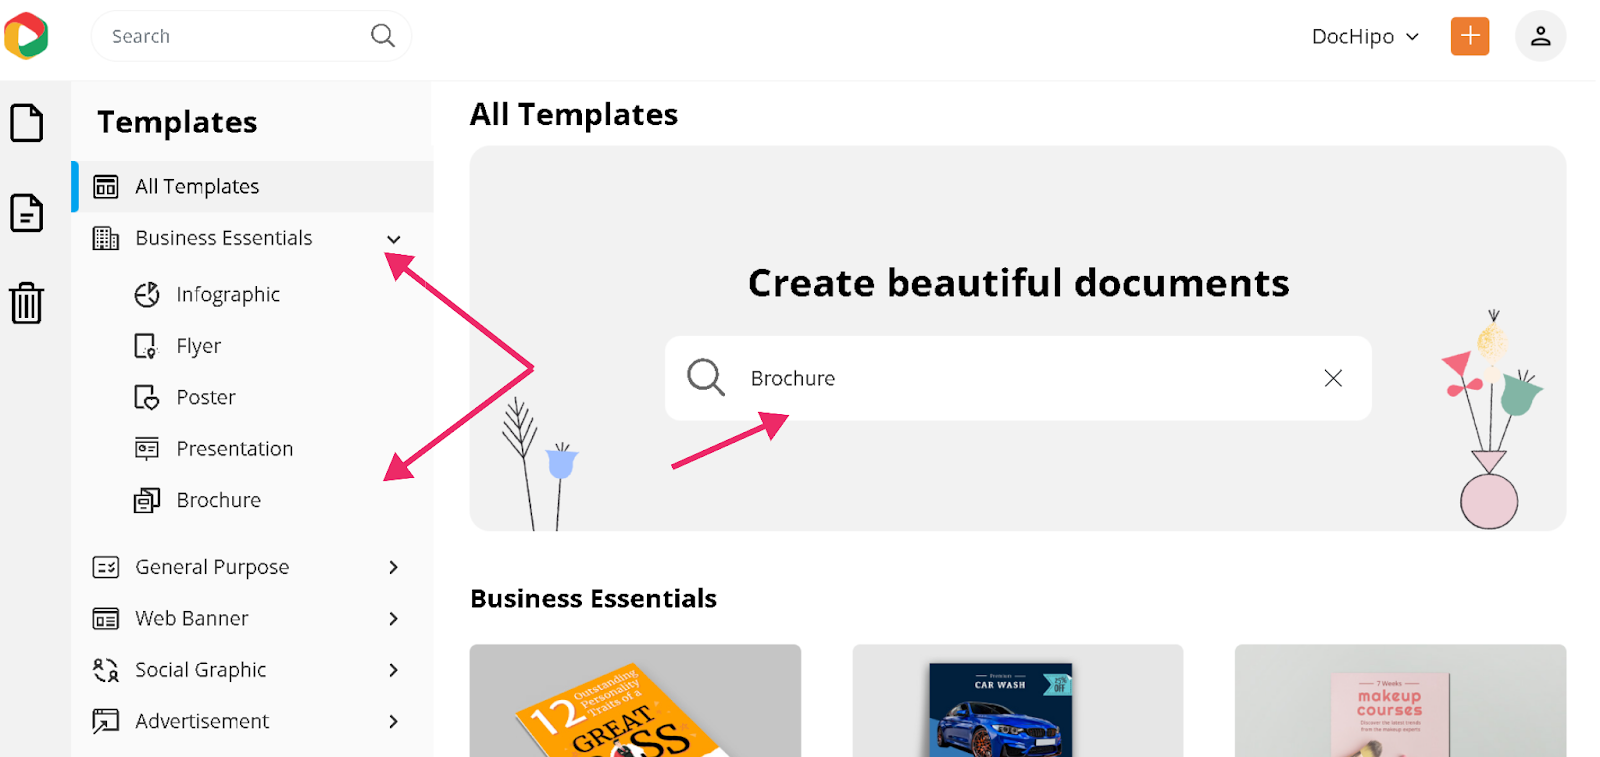 DocHipo homepage to search business brochures